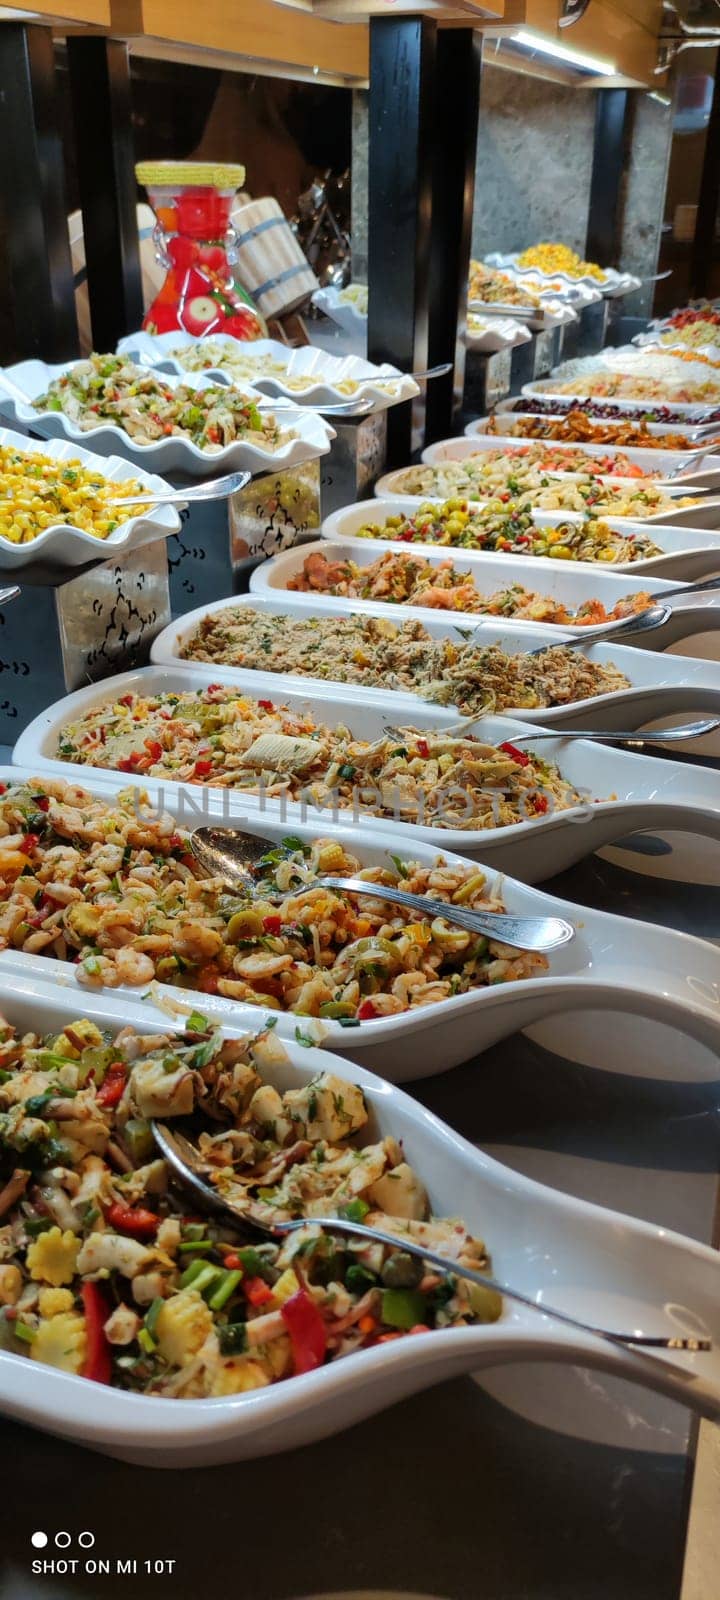 A huge assortment of salads in one of the hotel restaurants in Turkey by client111